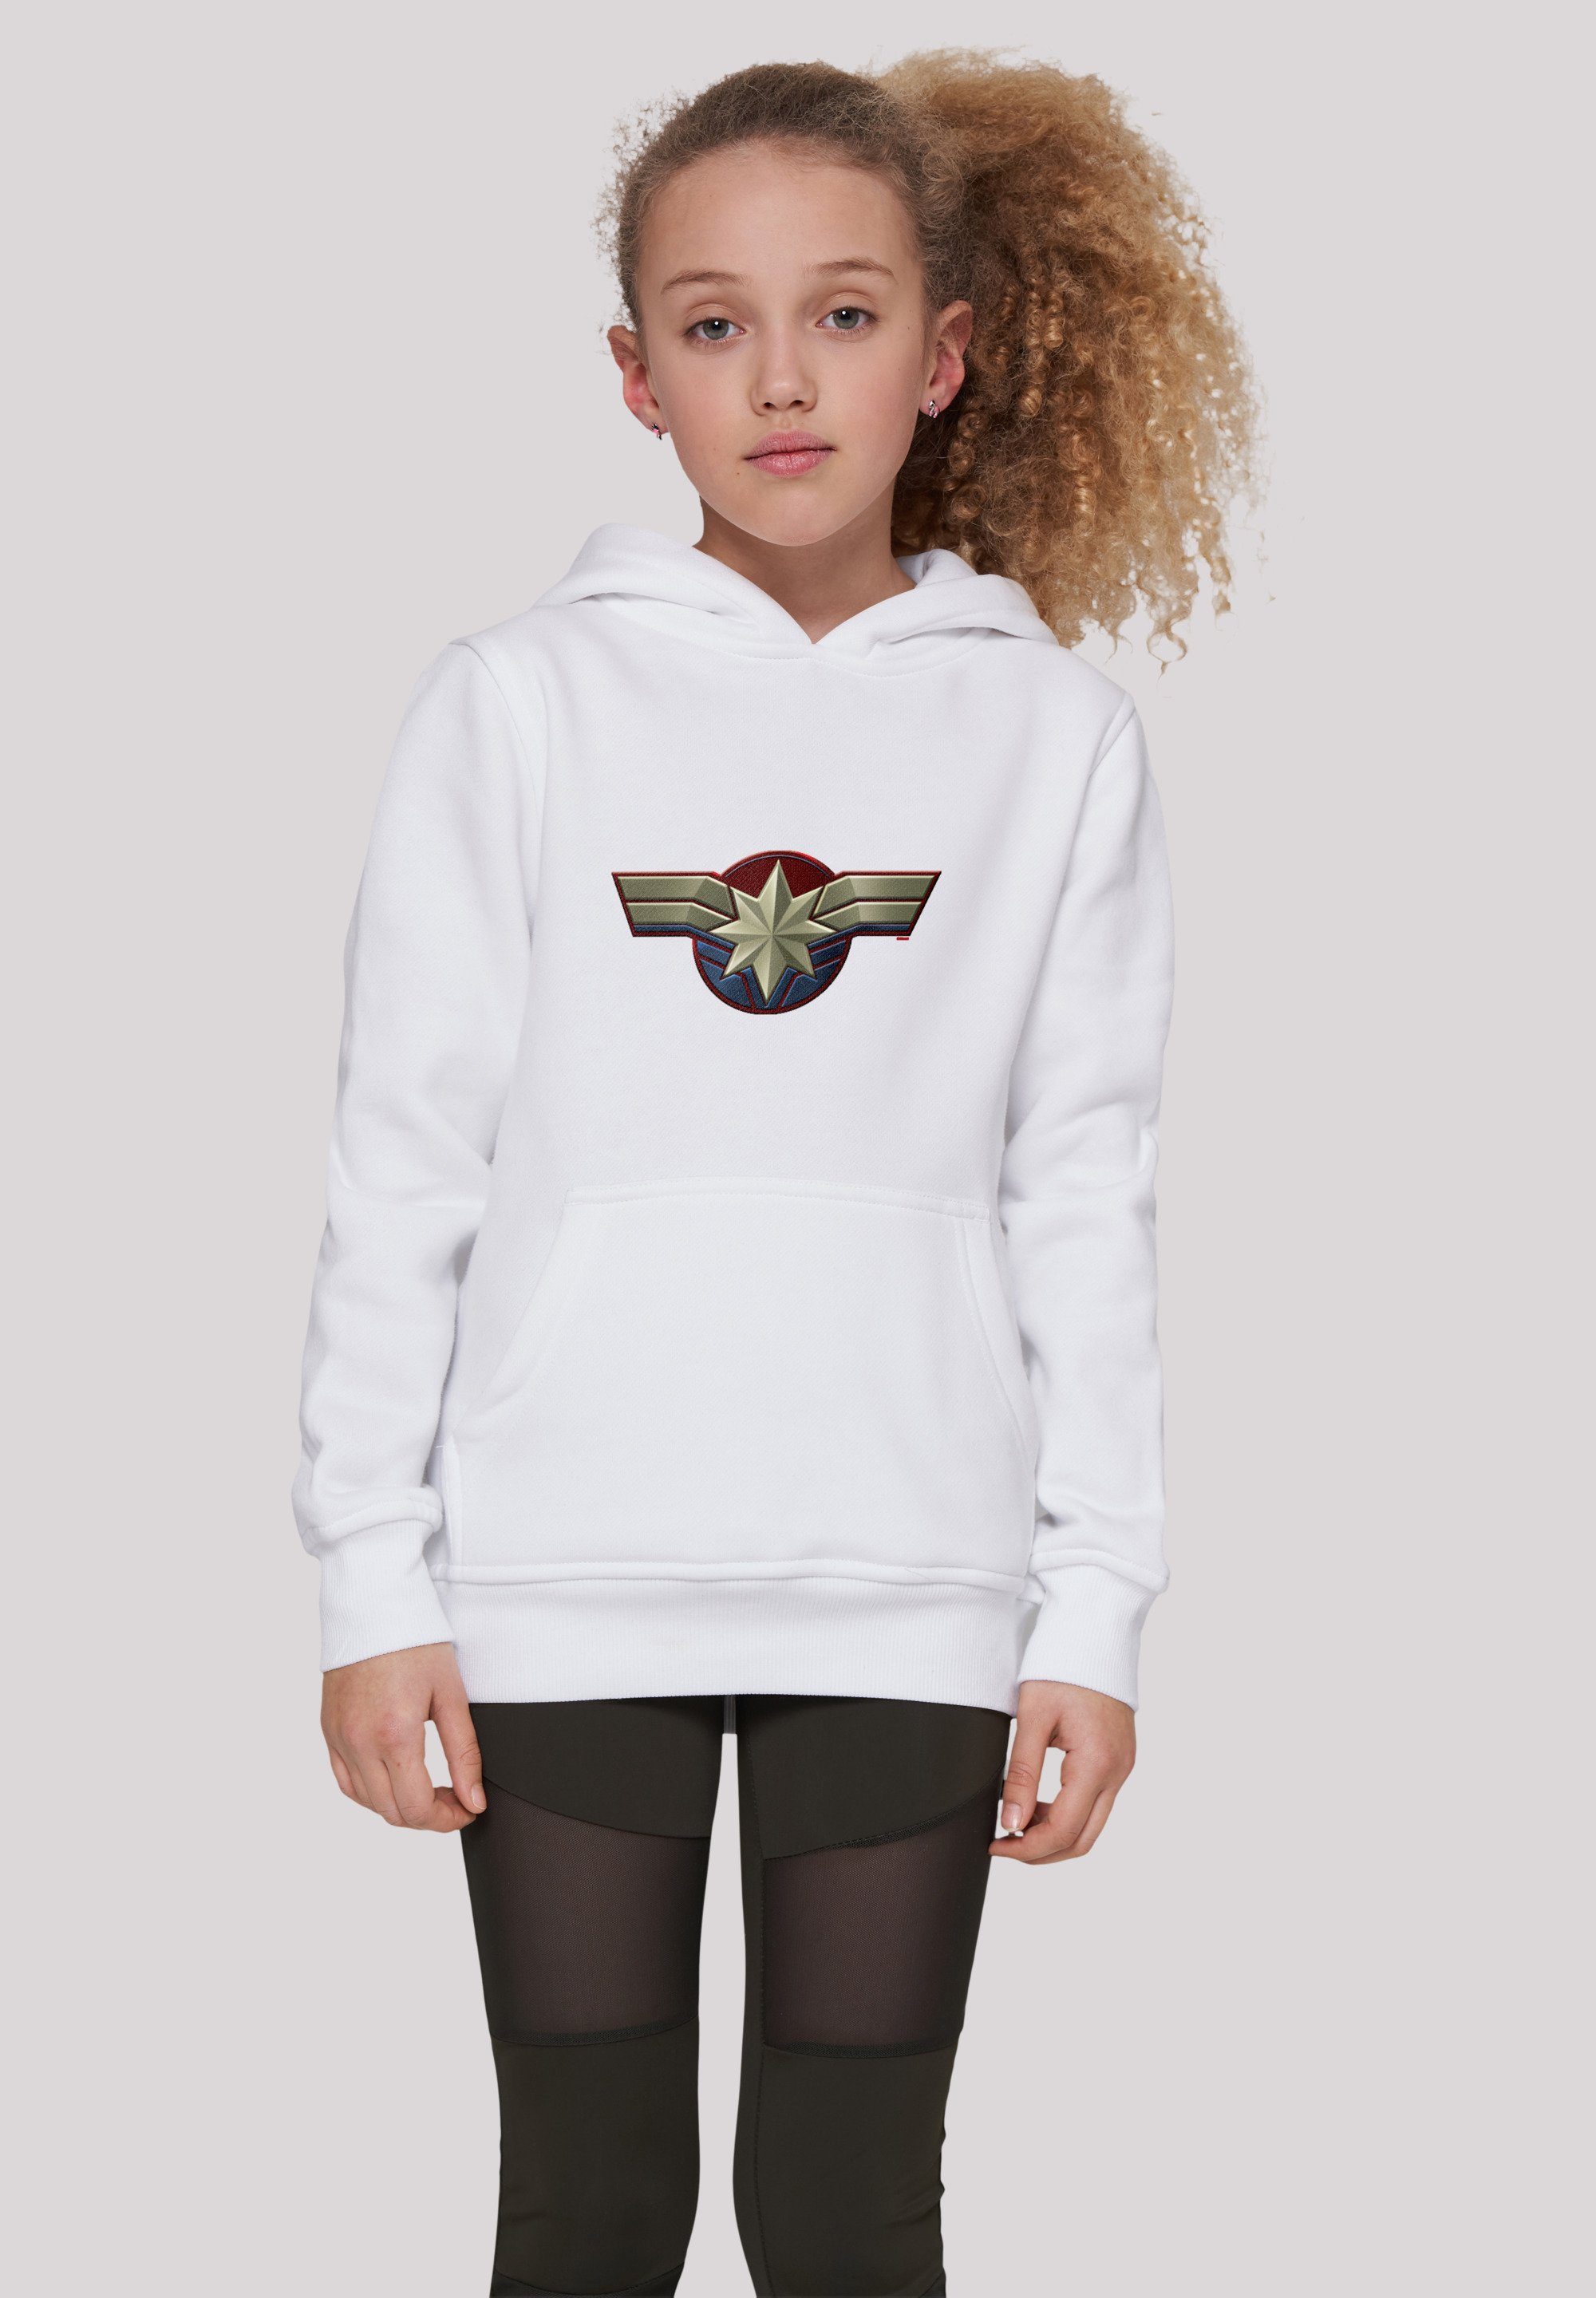 Basic white Kinder Captain Kids Chest Hoody Emblem (1-tlg) with Hoodie Marvel F4NT4STIC